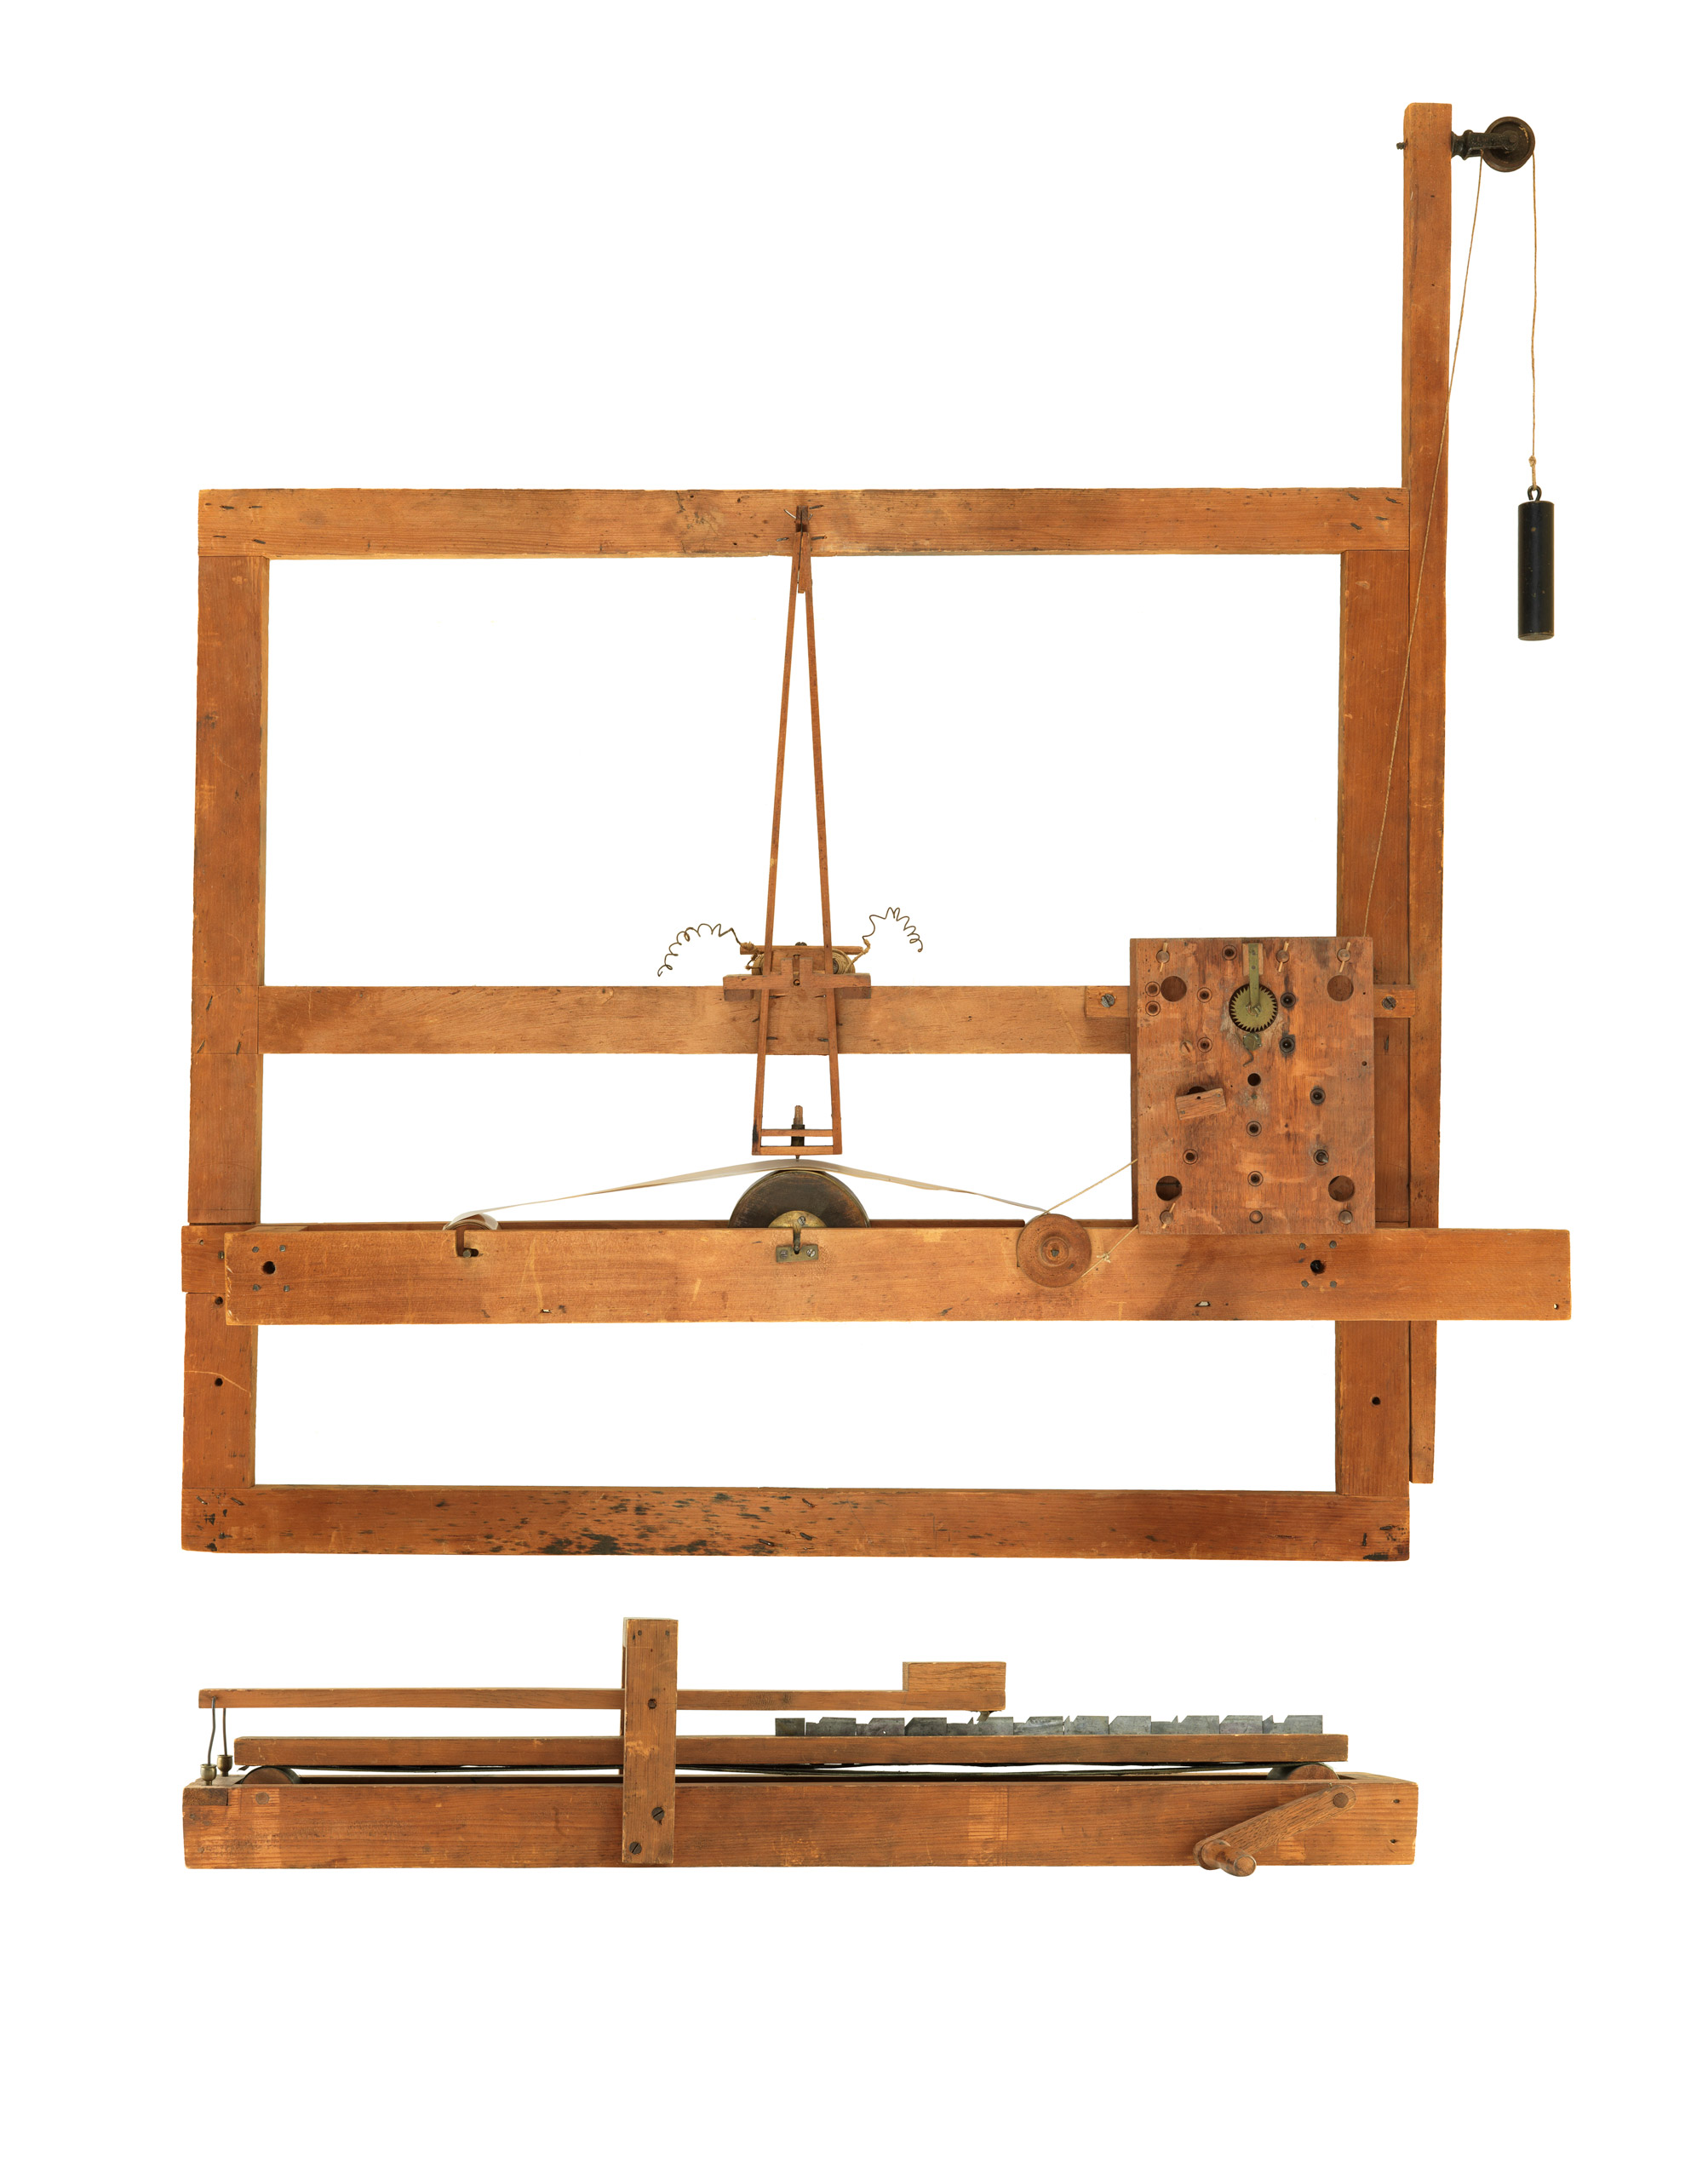 Samuel F. B. Morse converted an artist’s canvas stretcher into a telegraph receiver that recorded a message as a wavy line on a strip of paper. His telegraph transmitter sent electric pulses representing letter and numbers that activated an electromagnet on the receiver.